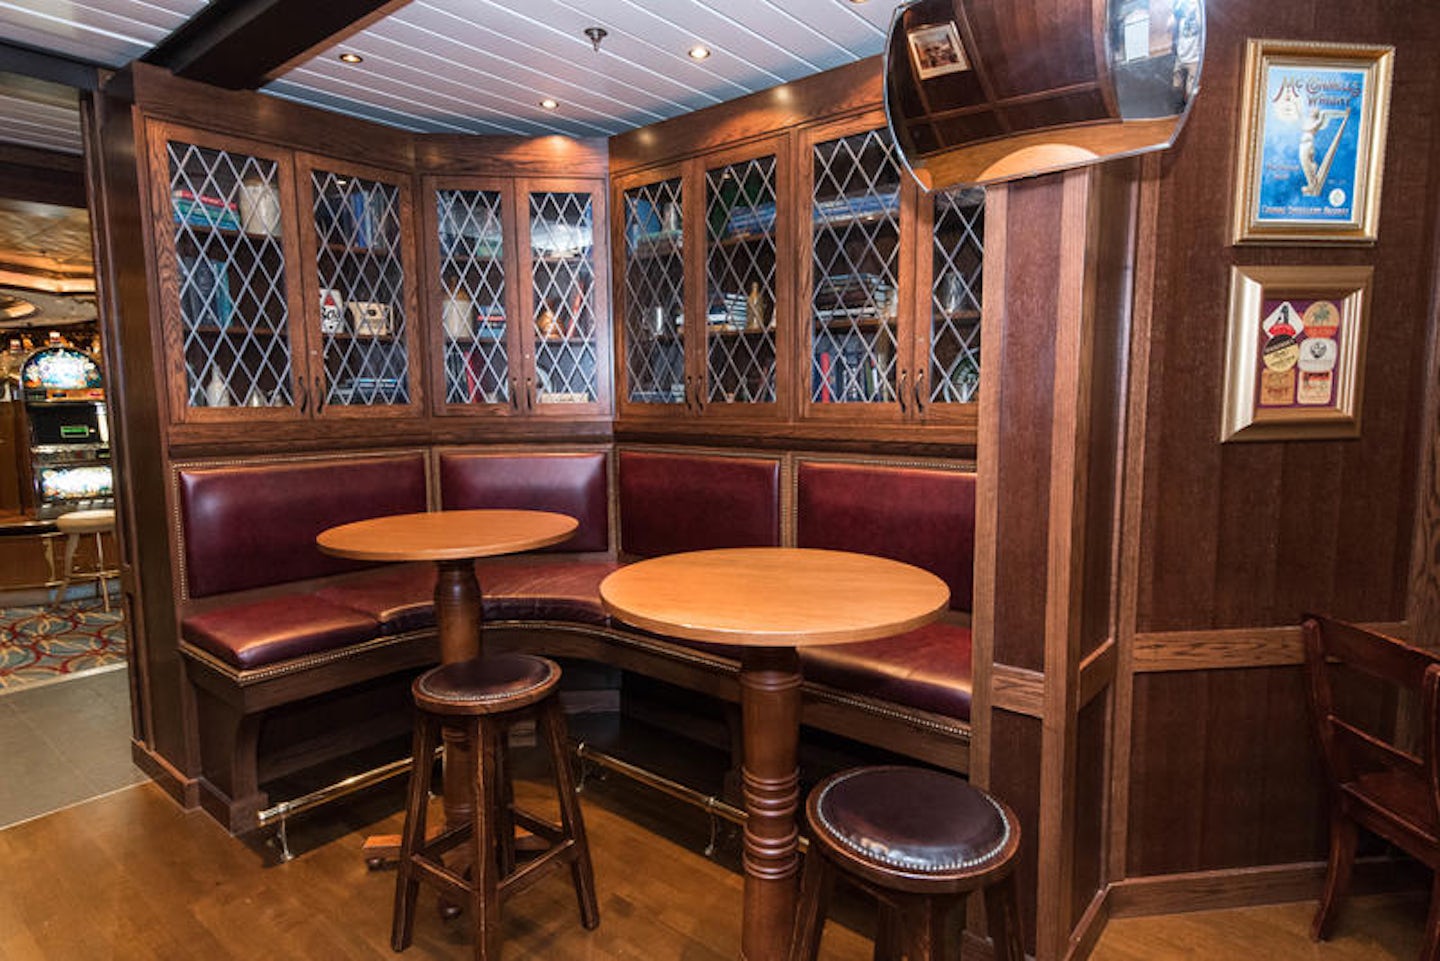 King & Country Pub on Brilliance of the Seas